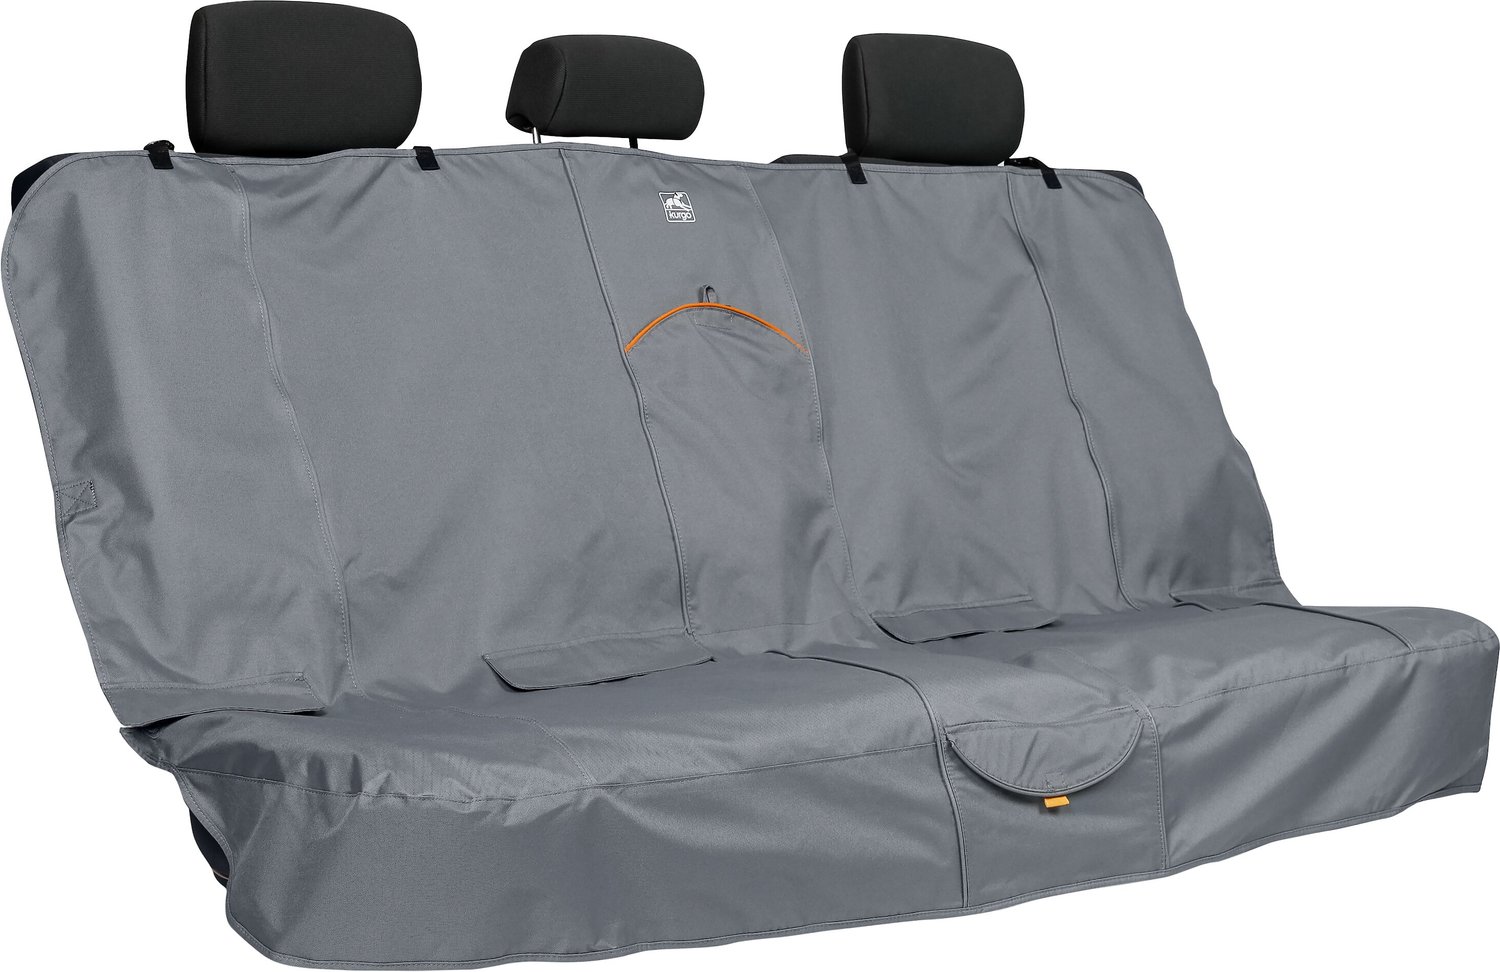 Kurgo Extended Width Dog Bench Seat Cover